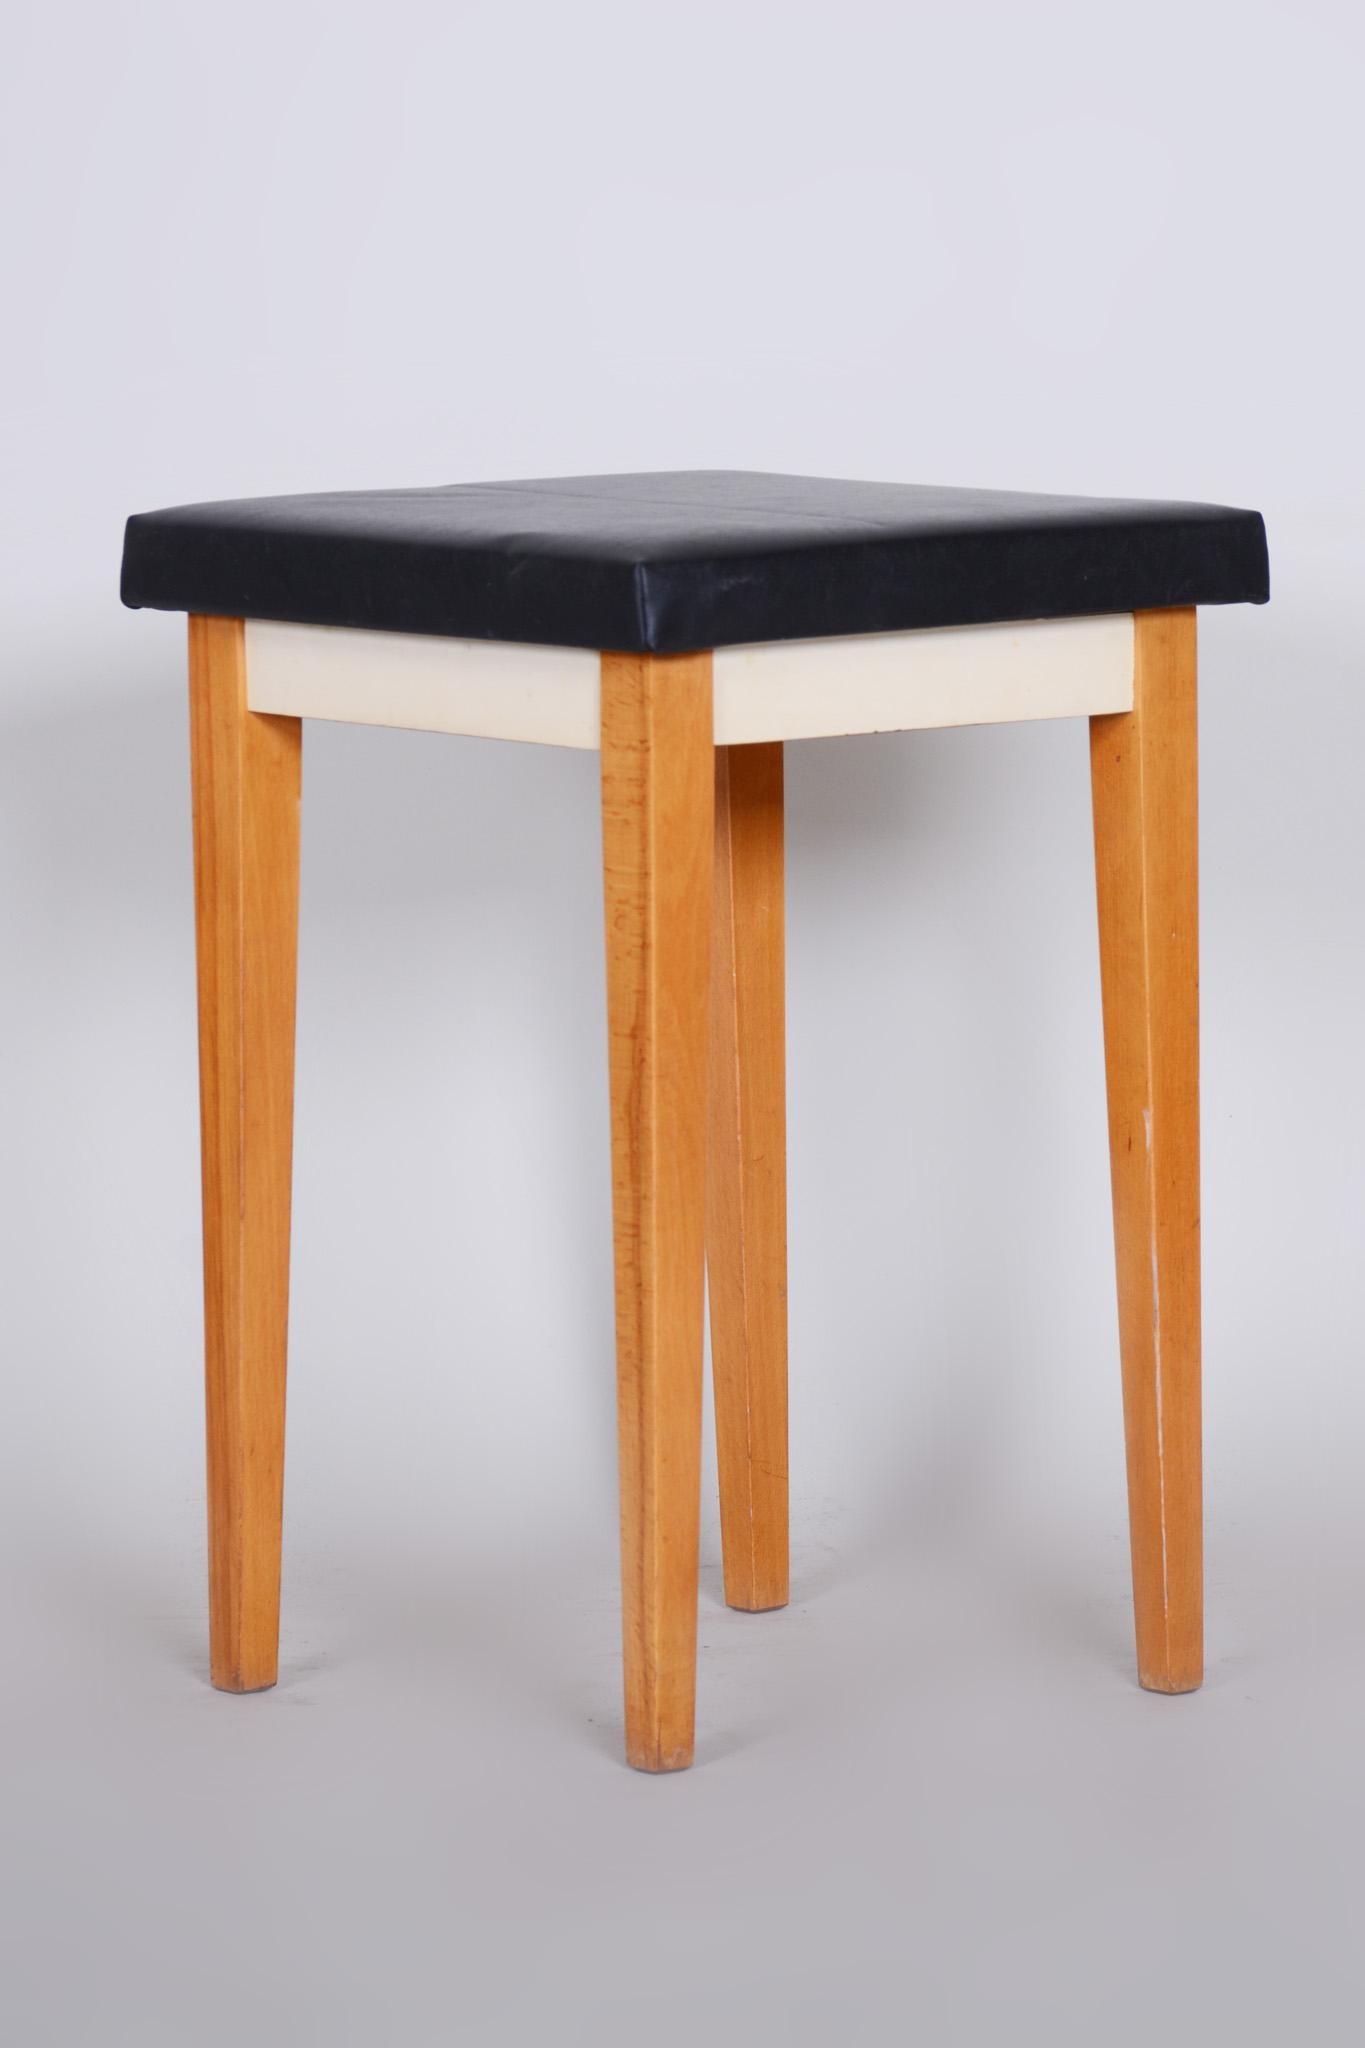 Mid-Century Modern Black Midcentury Beech Stool, 1950s, Original Preserved Condition For Sale